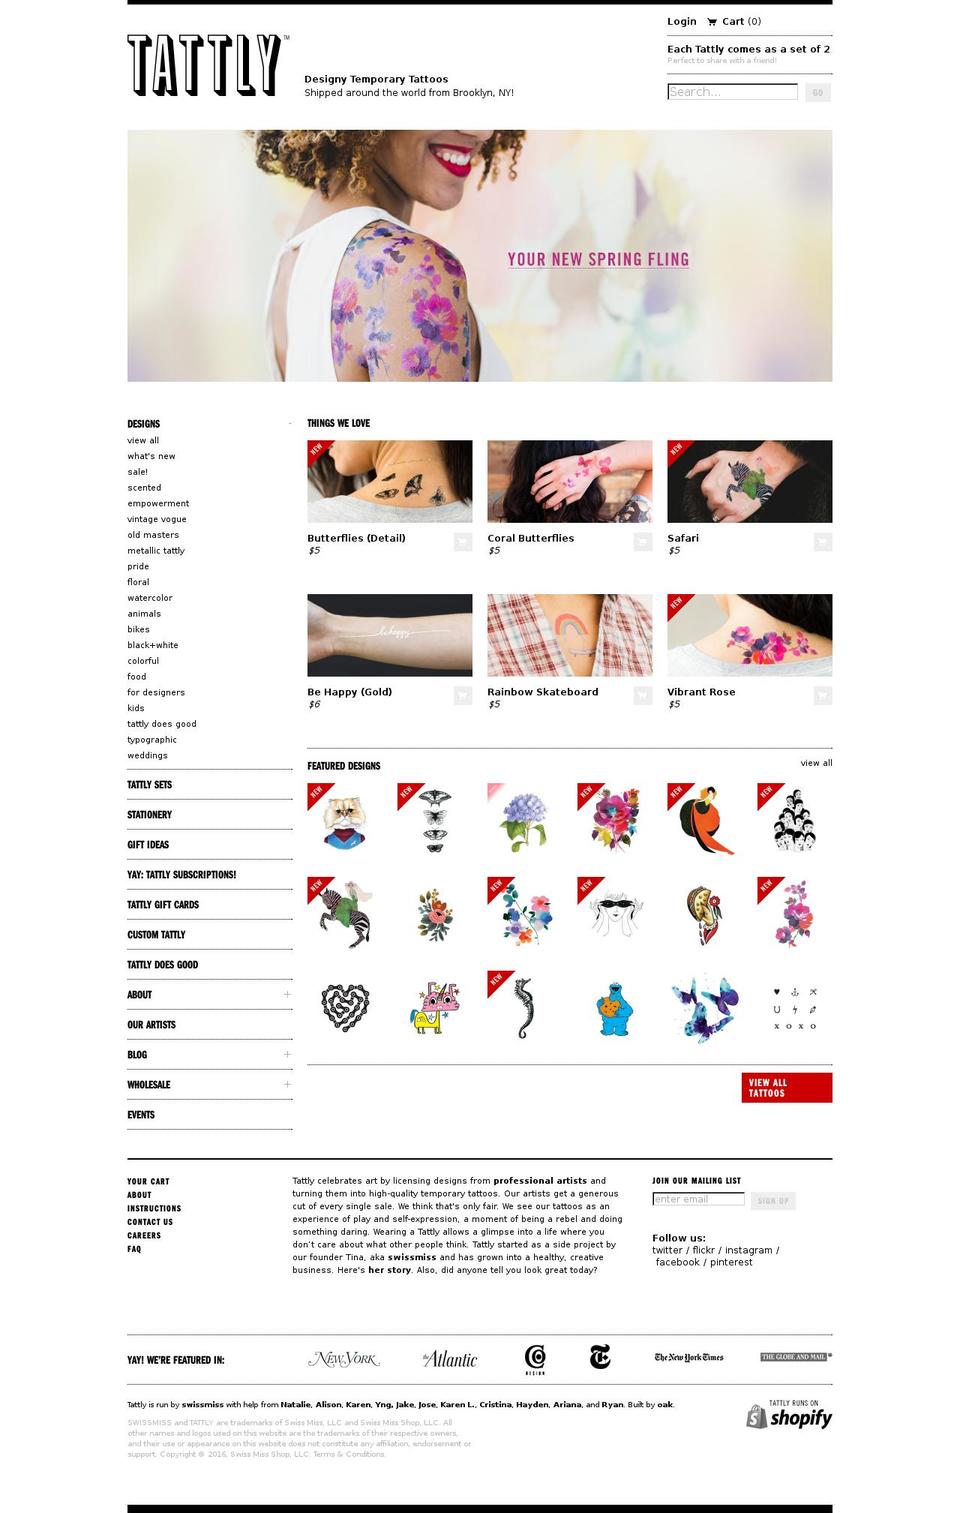 Debut Shopify theme site example tattly.com